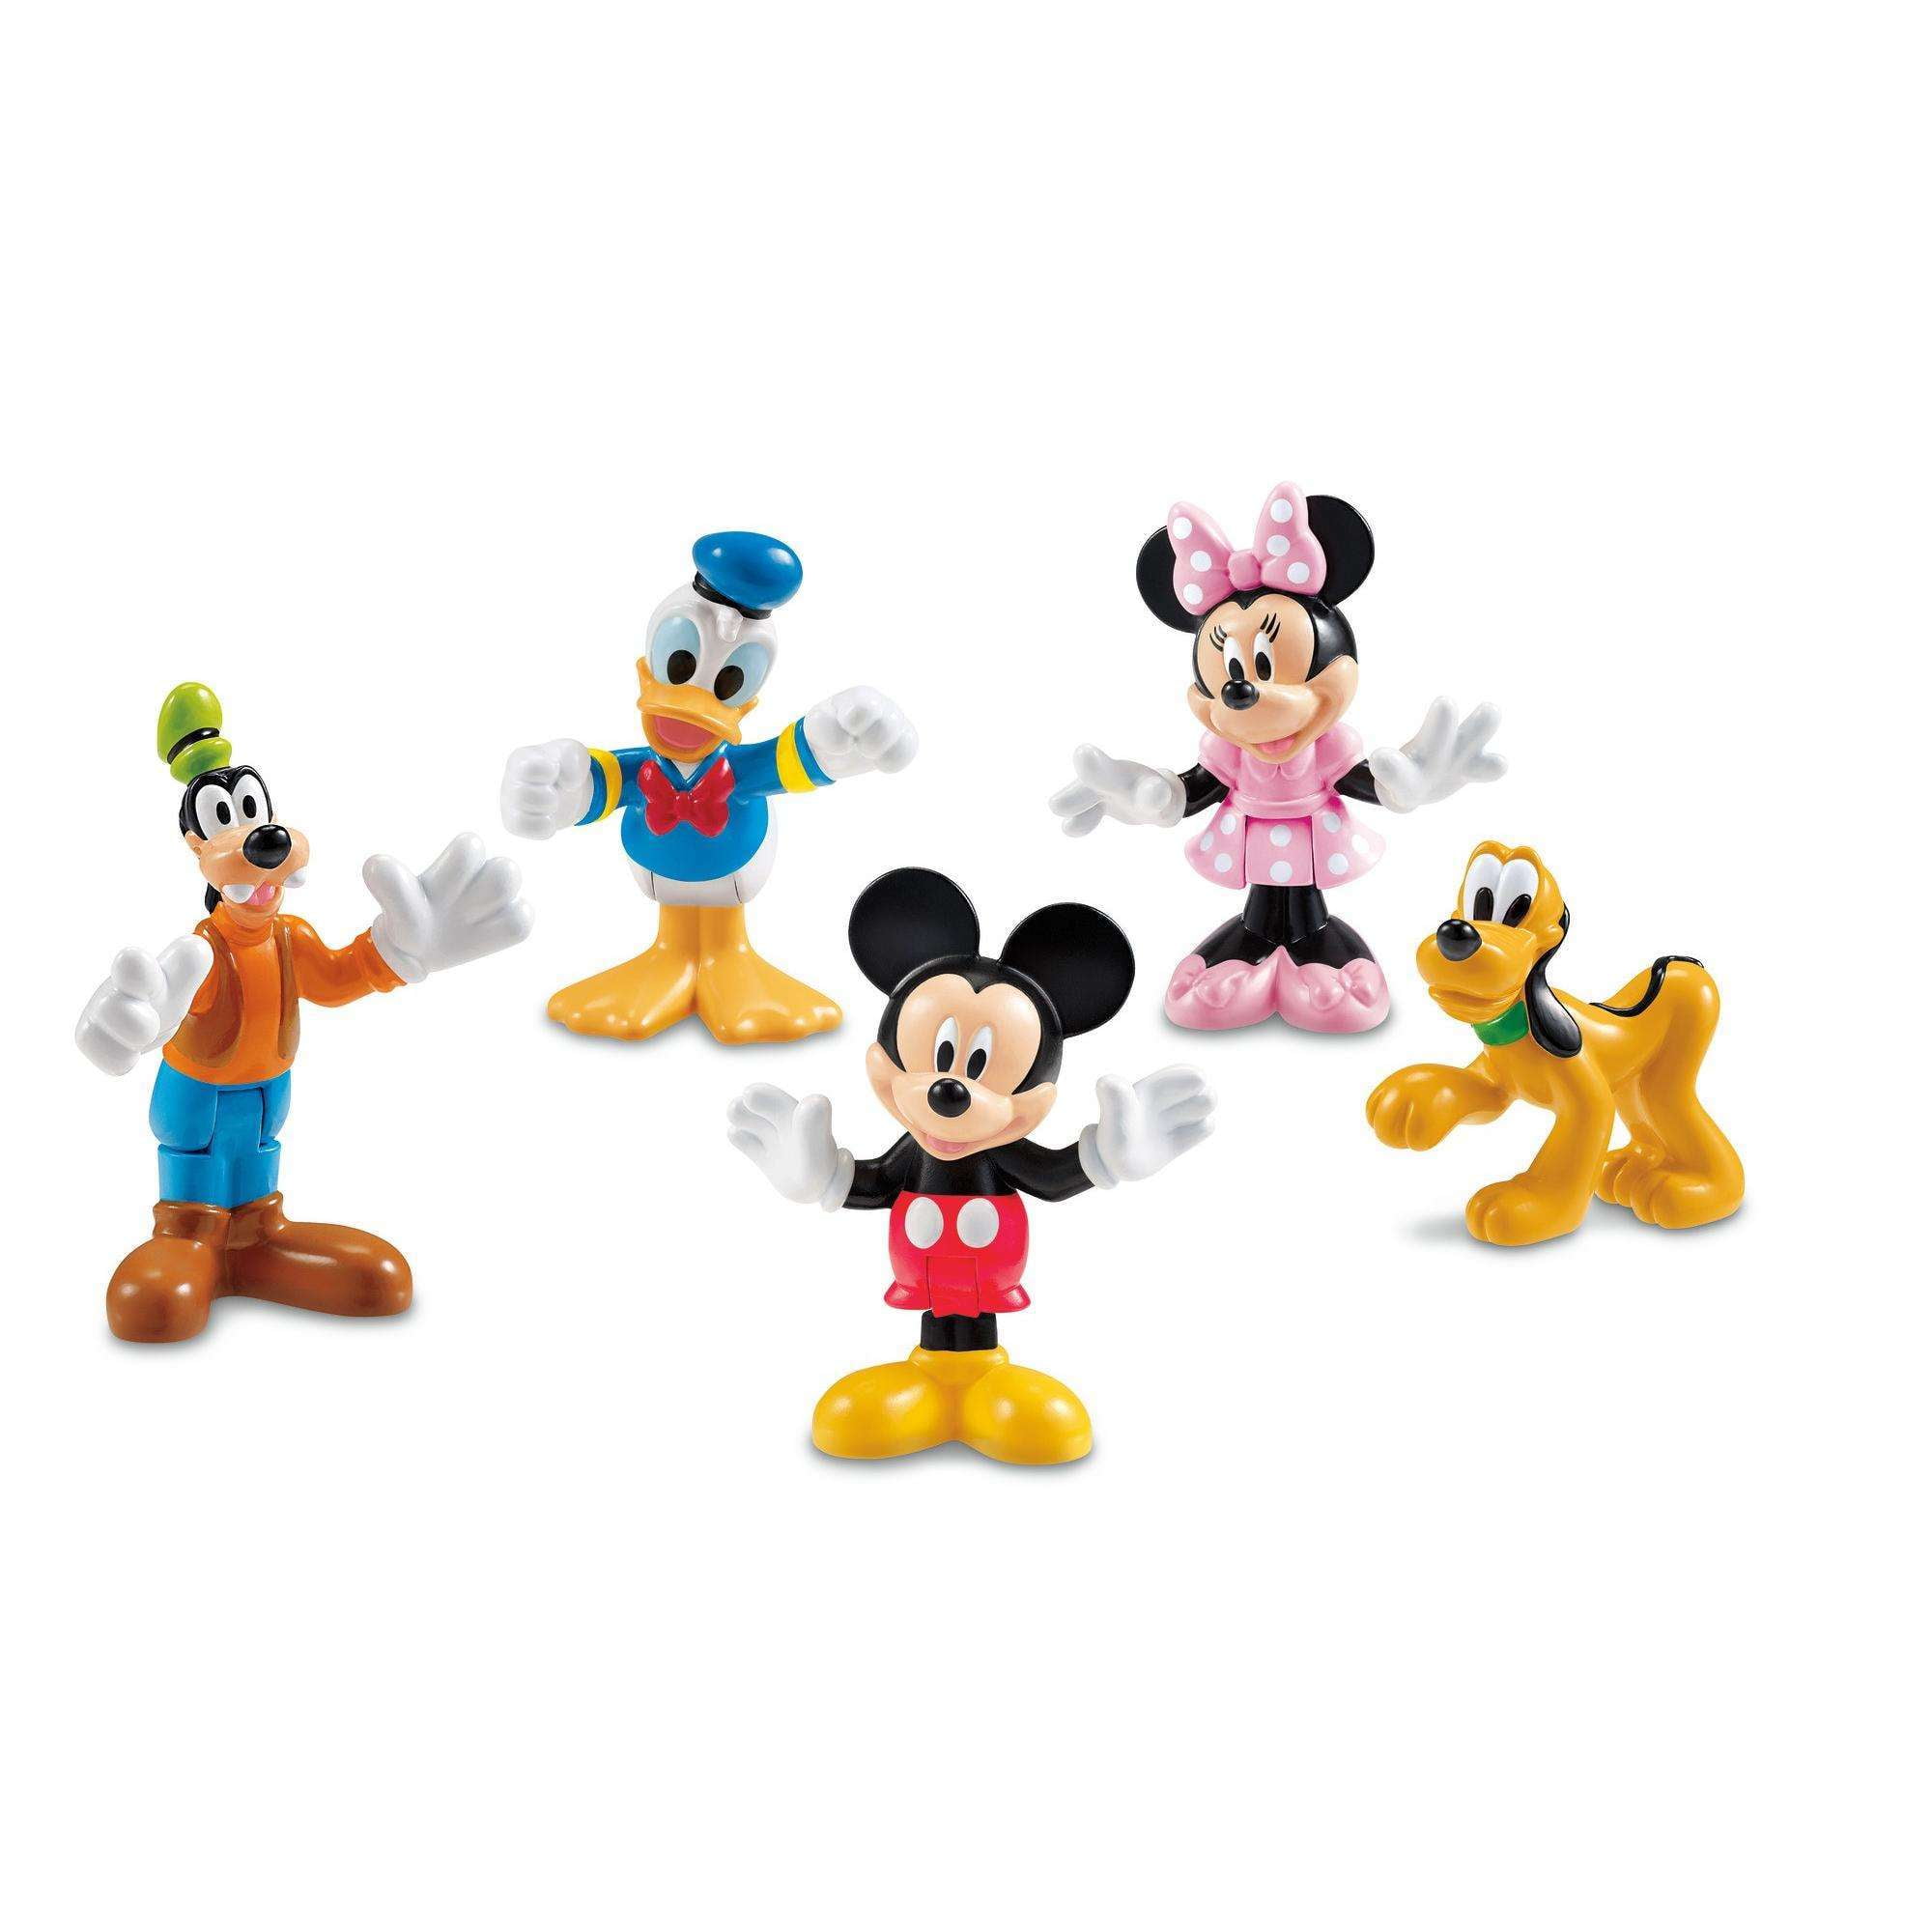 Super Cute Disney Mickey Mouse Clubhouse Figure Minnie Mouse